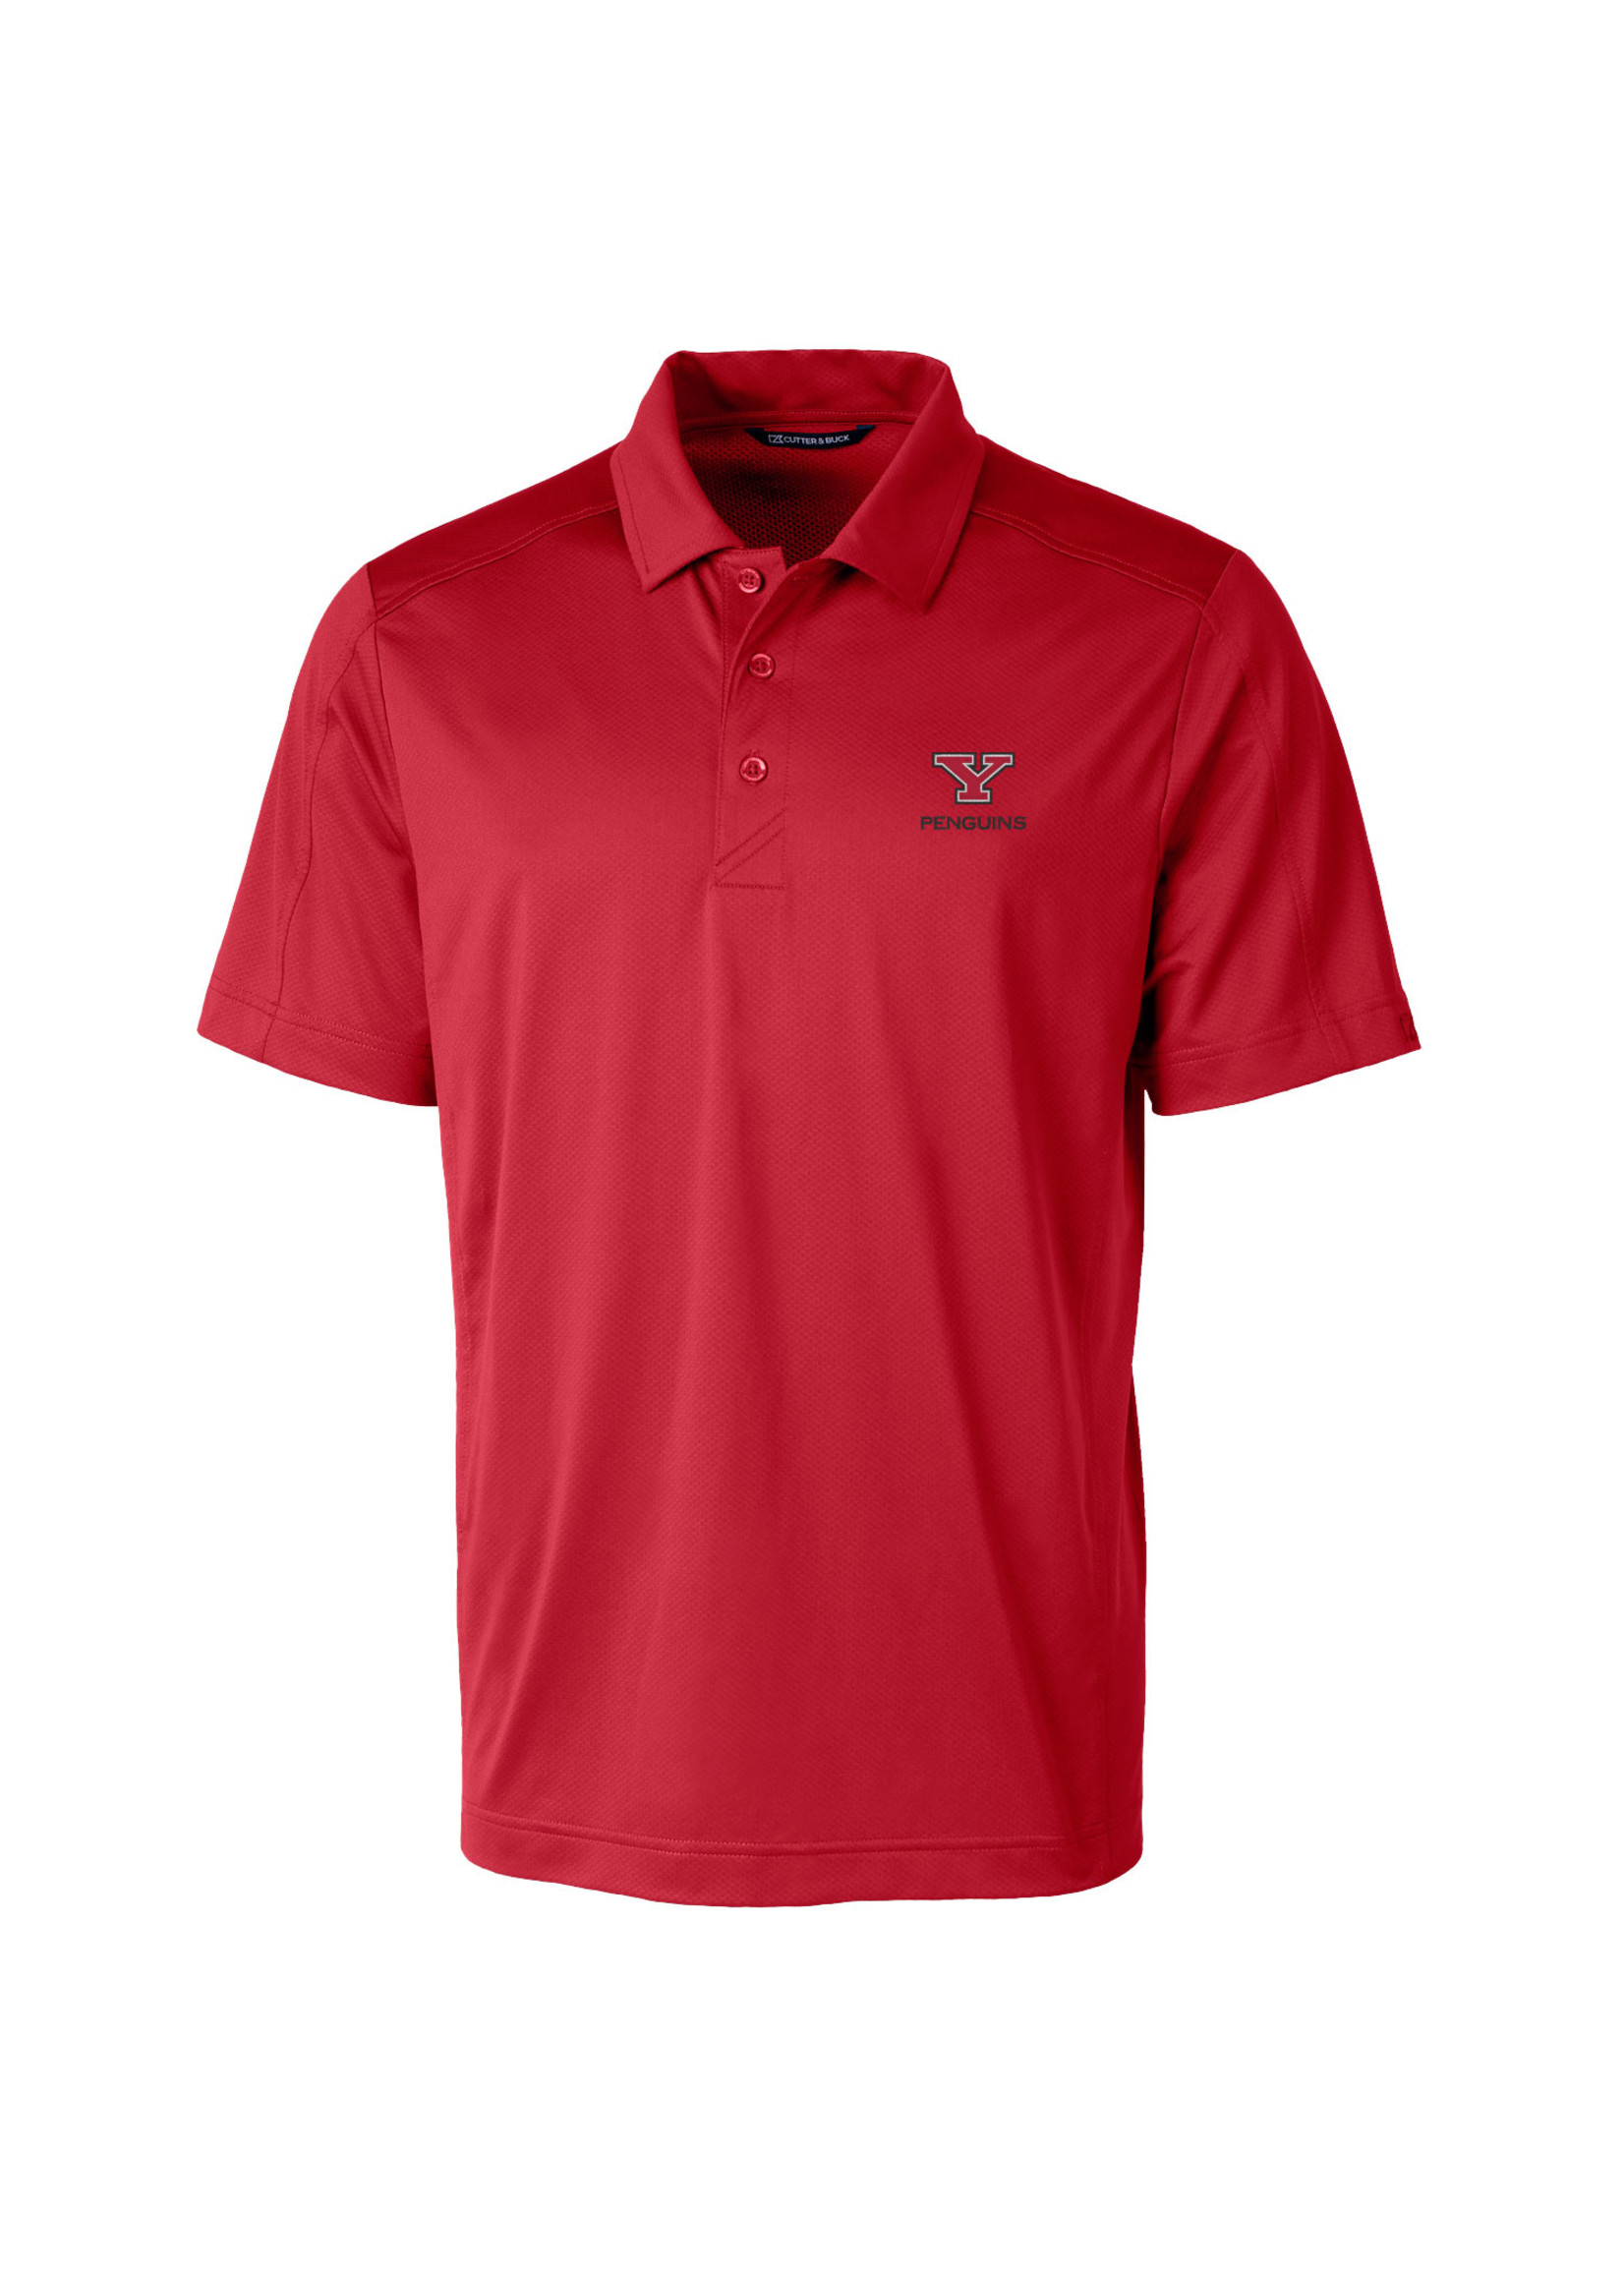 Cutter & Buck Youngstown State Penguins Textured Polo